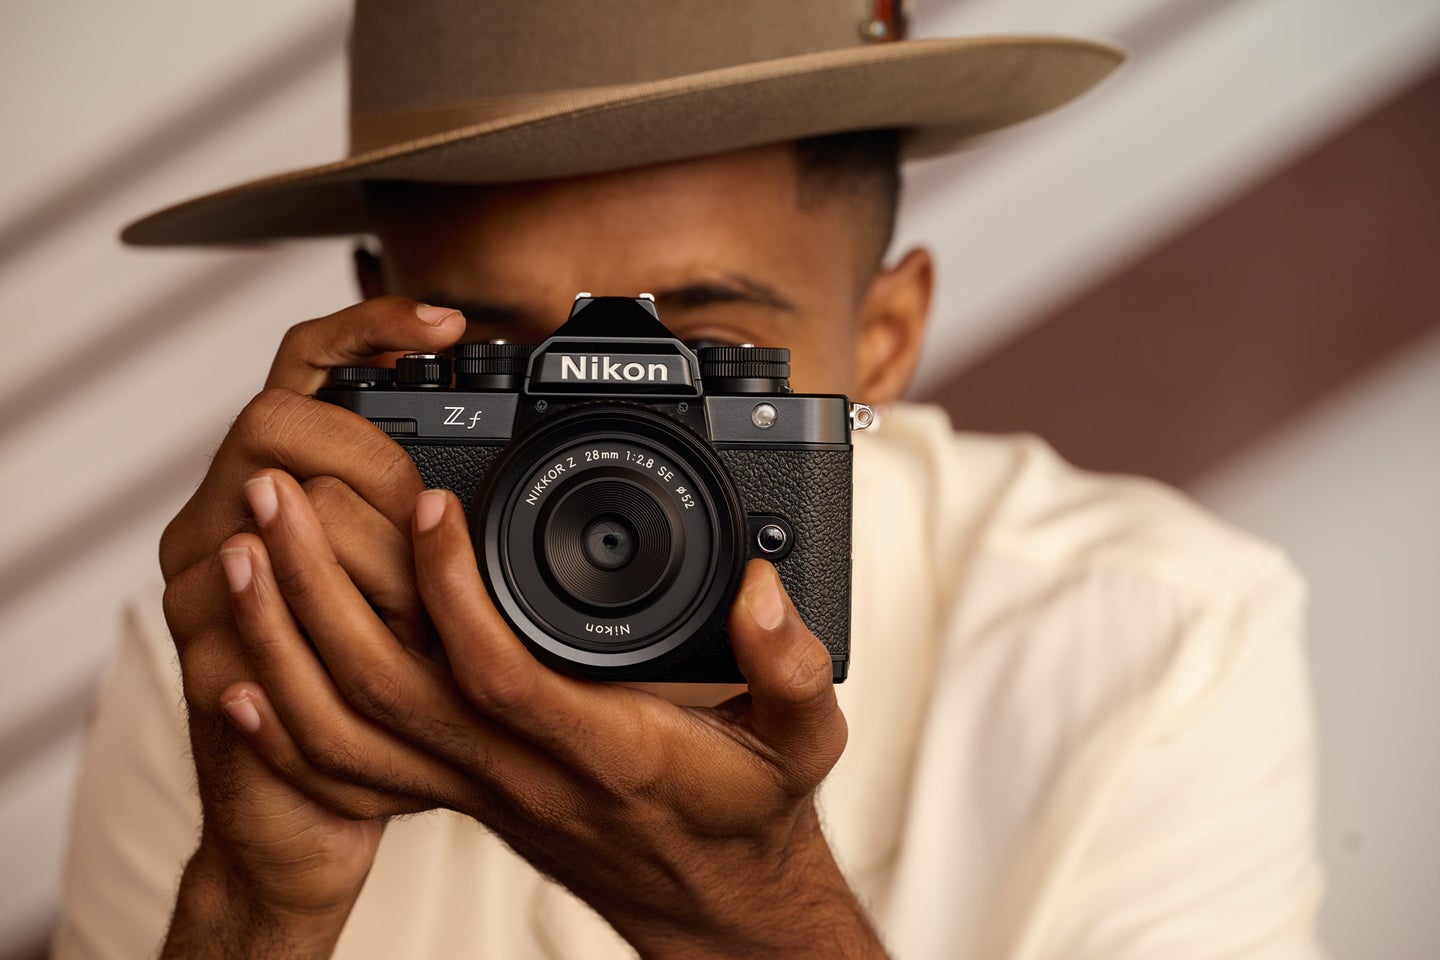 The retro-looking Nikon Z f held up to a person's eye